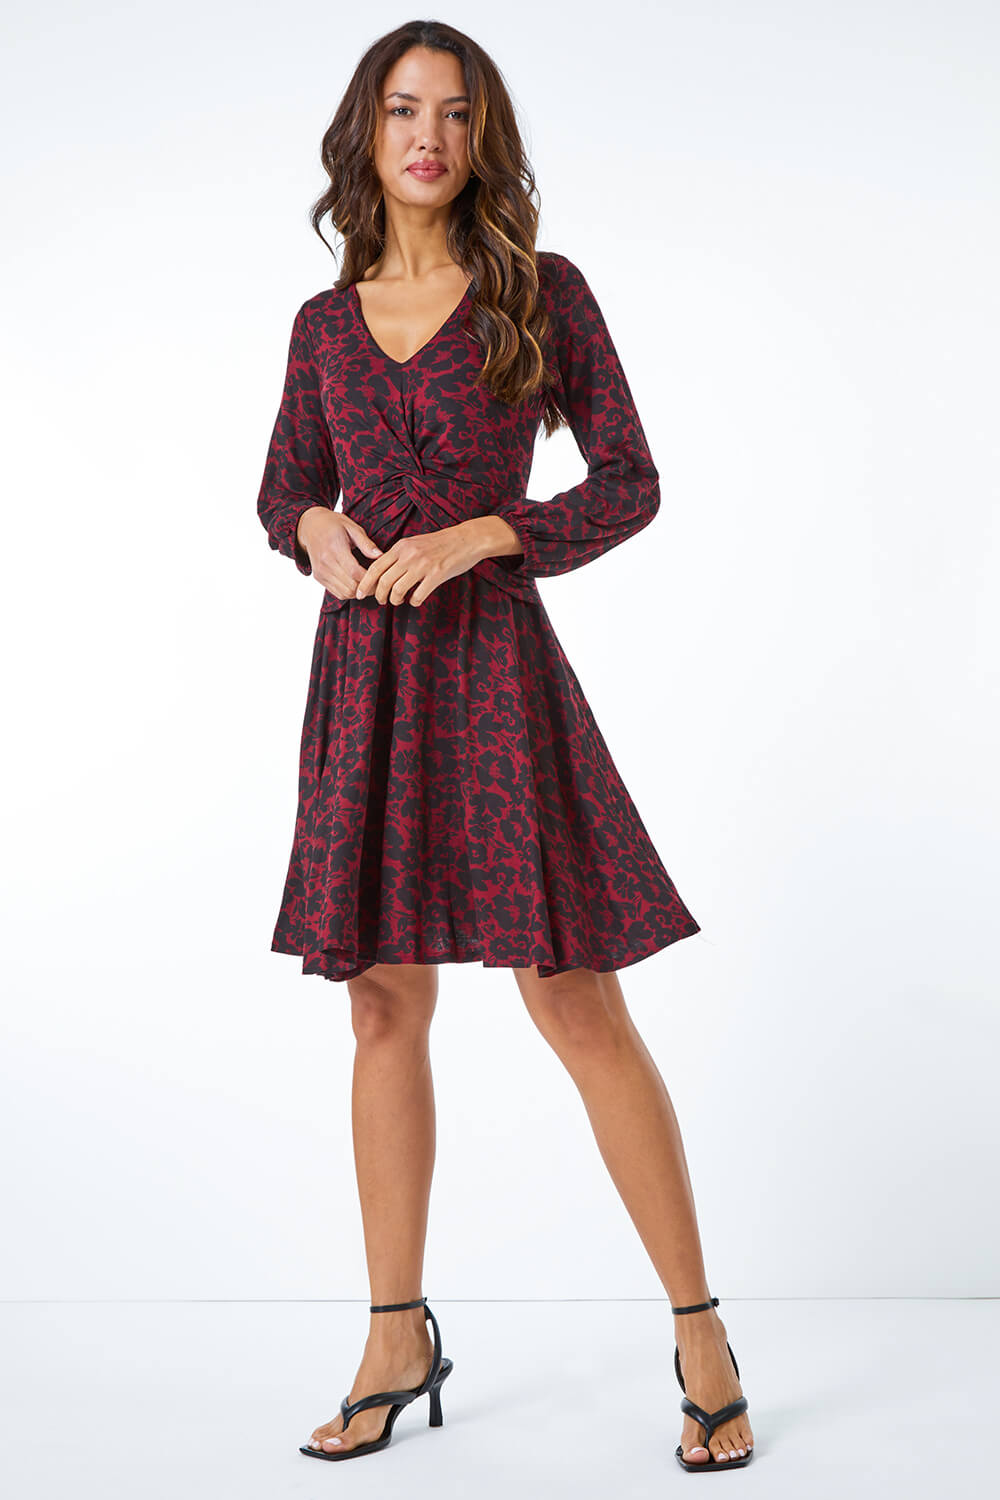 Red Floral Twist Stretch Ruched Jersey Dress, Image 4 of 5